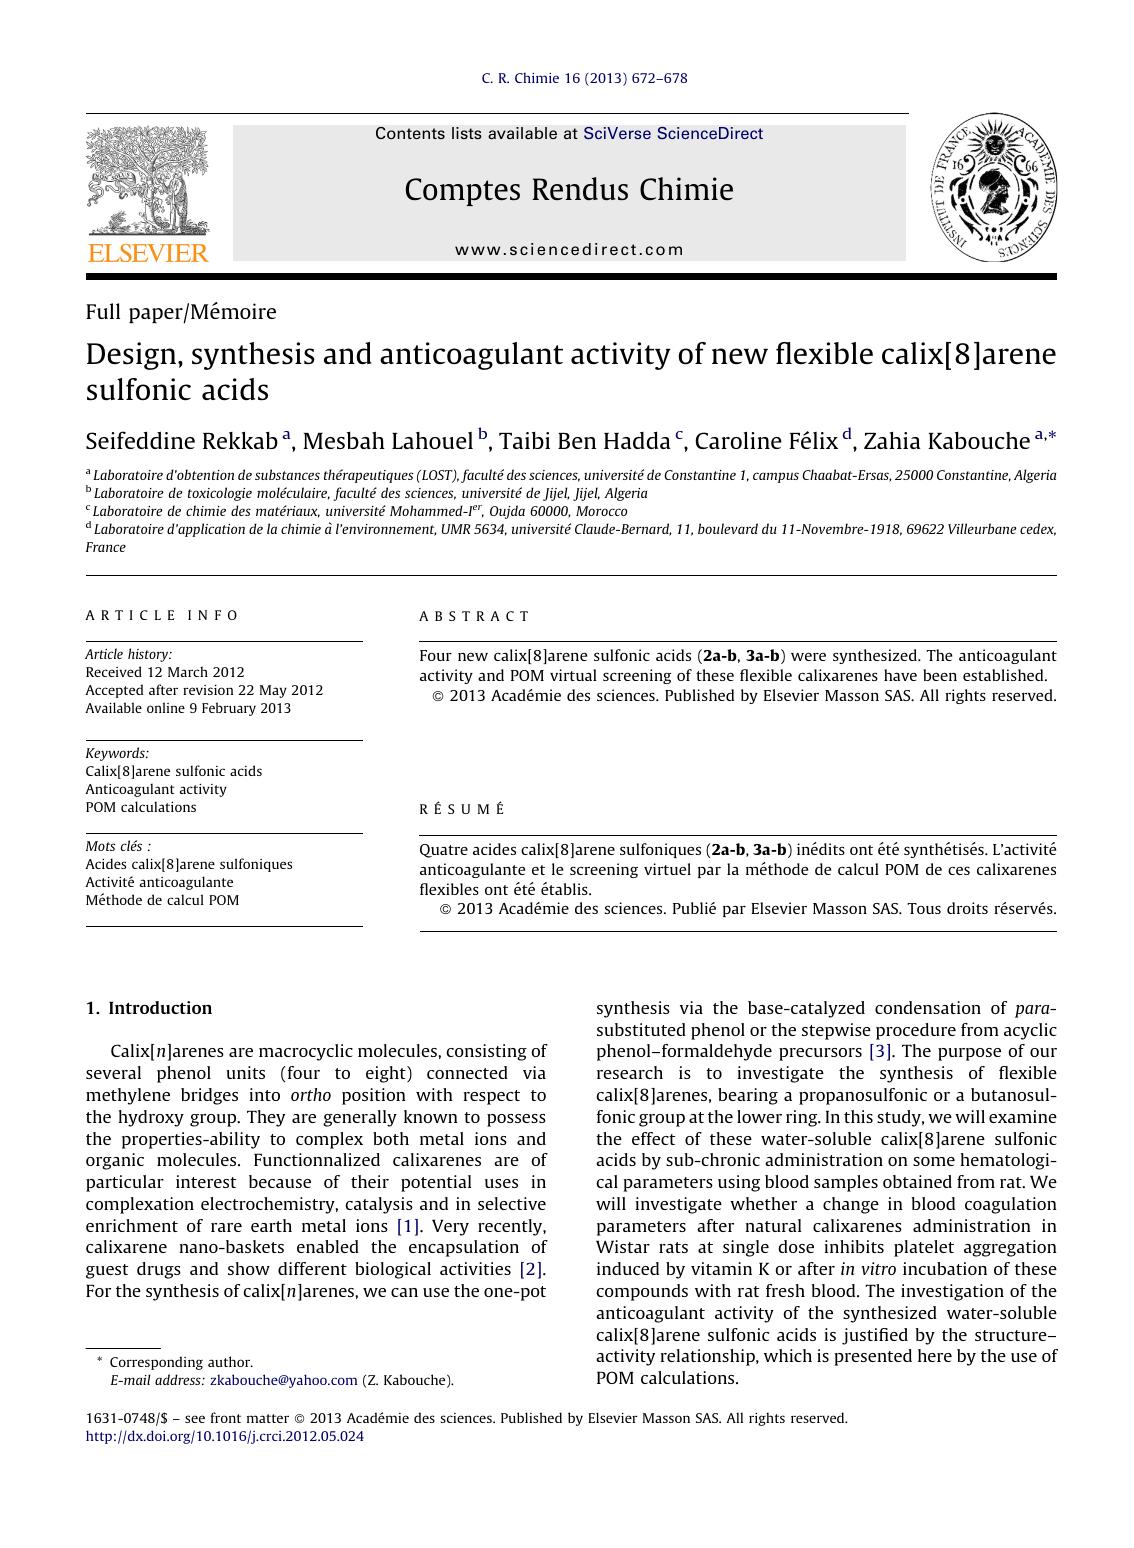 Design, synthesis and anticoagulant activity of new flexible calix[8]arene sulfonic acids by Seifeddine Rekkab